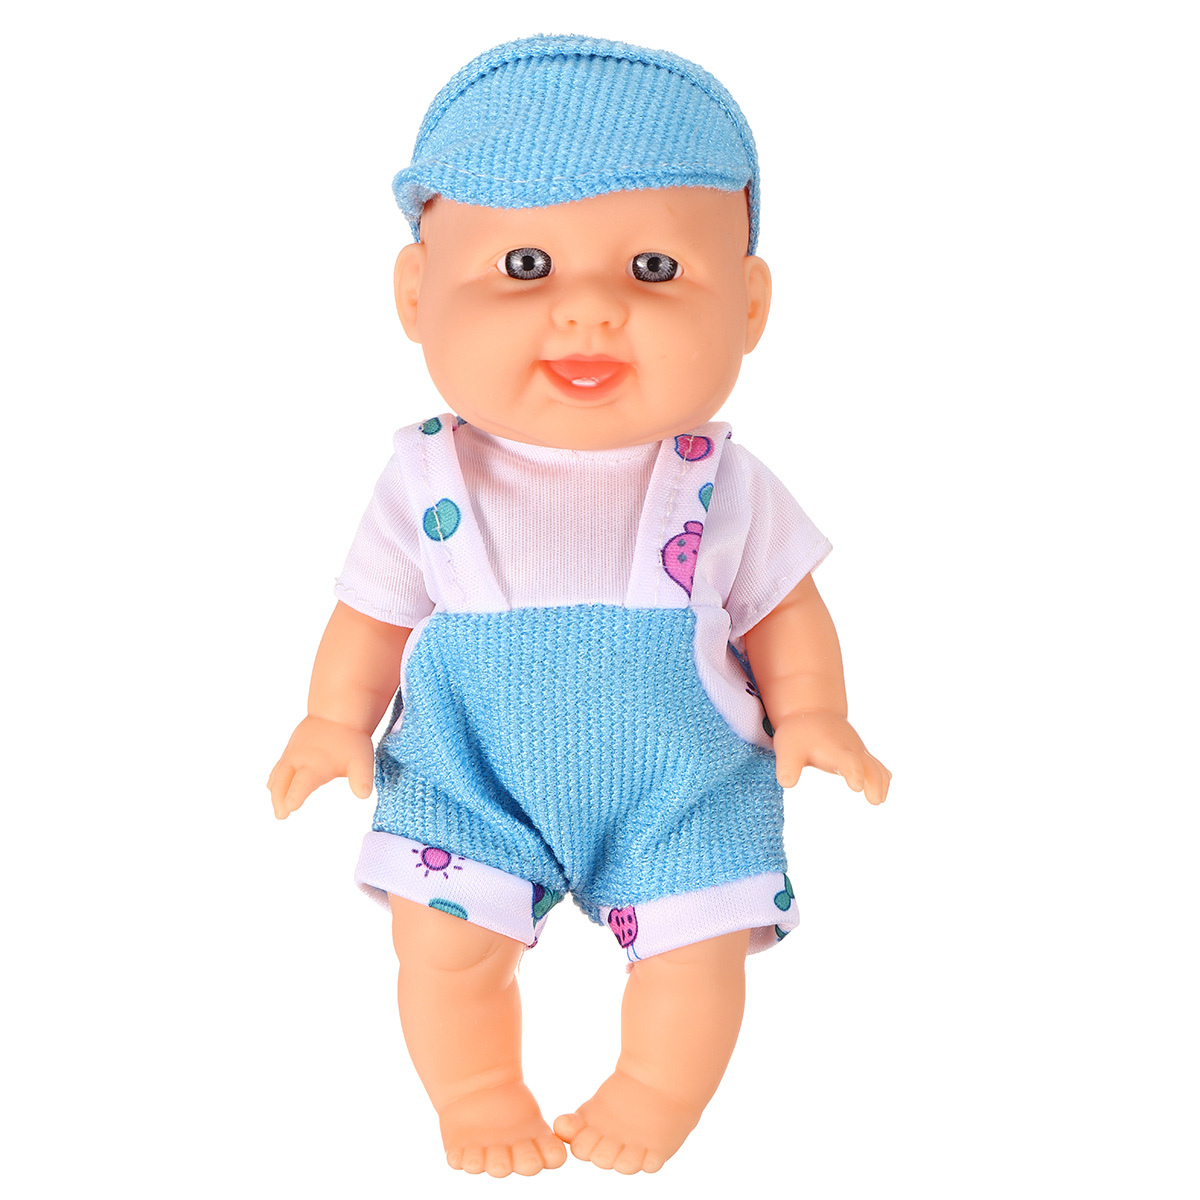 Simulation-Baby-3D-Creative-Cute-Doll-Play-House-Toy-Doll-Vinyl-Doll-Gift-1818656-12